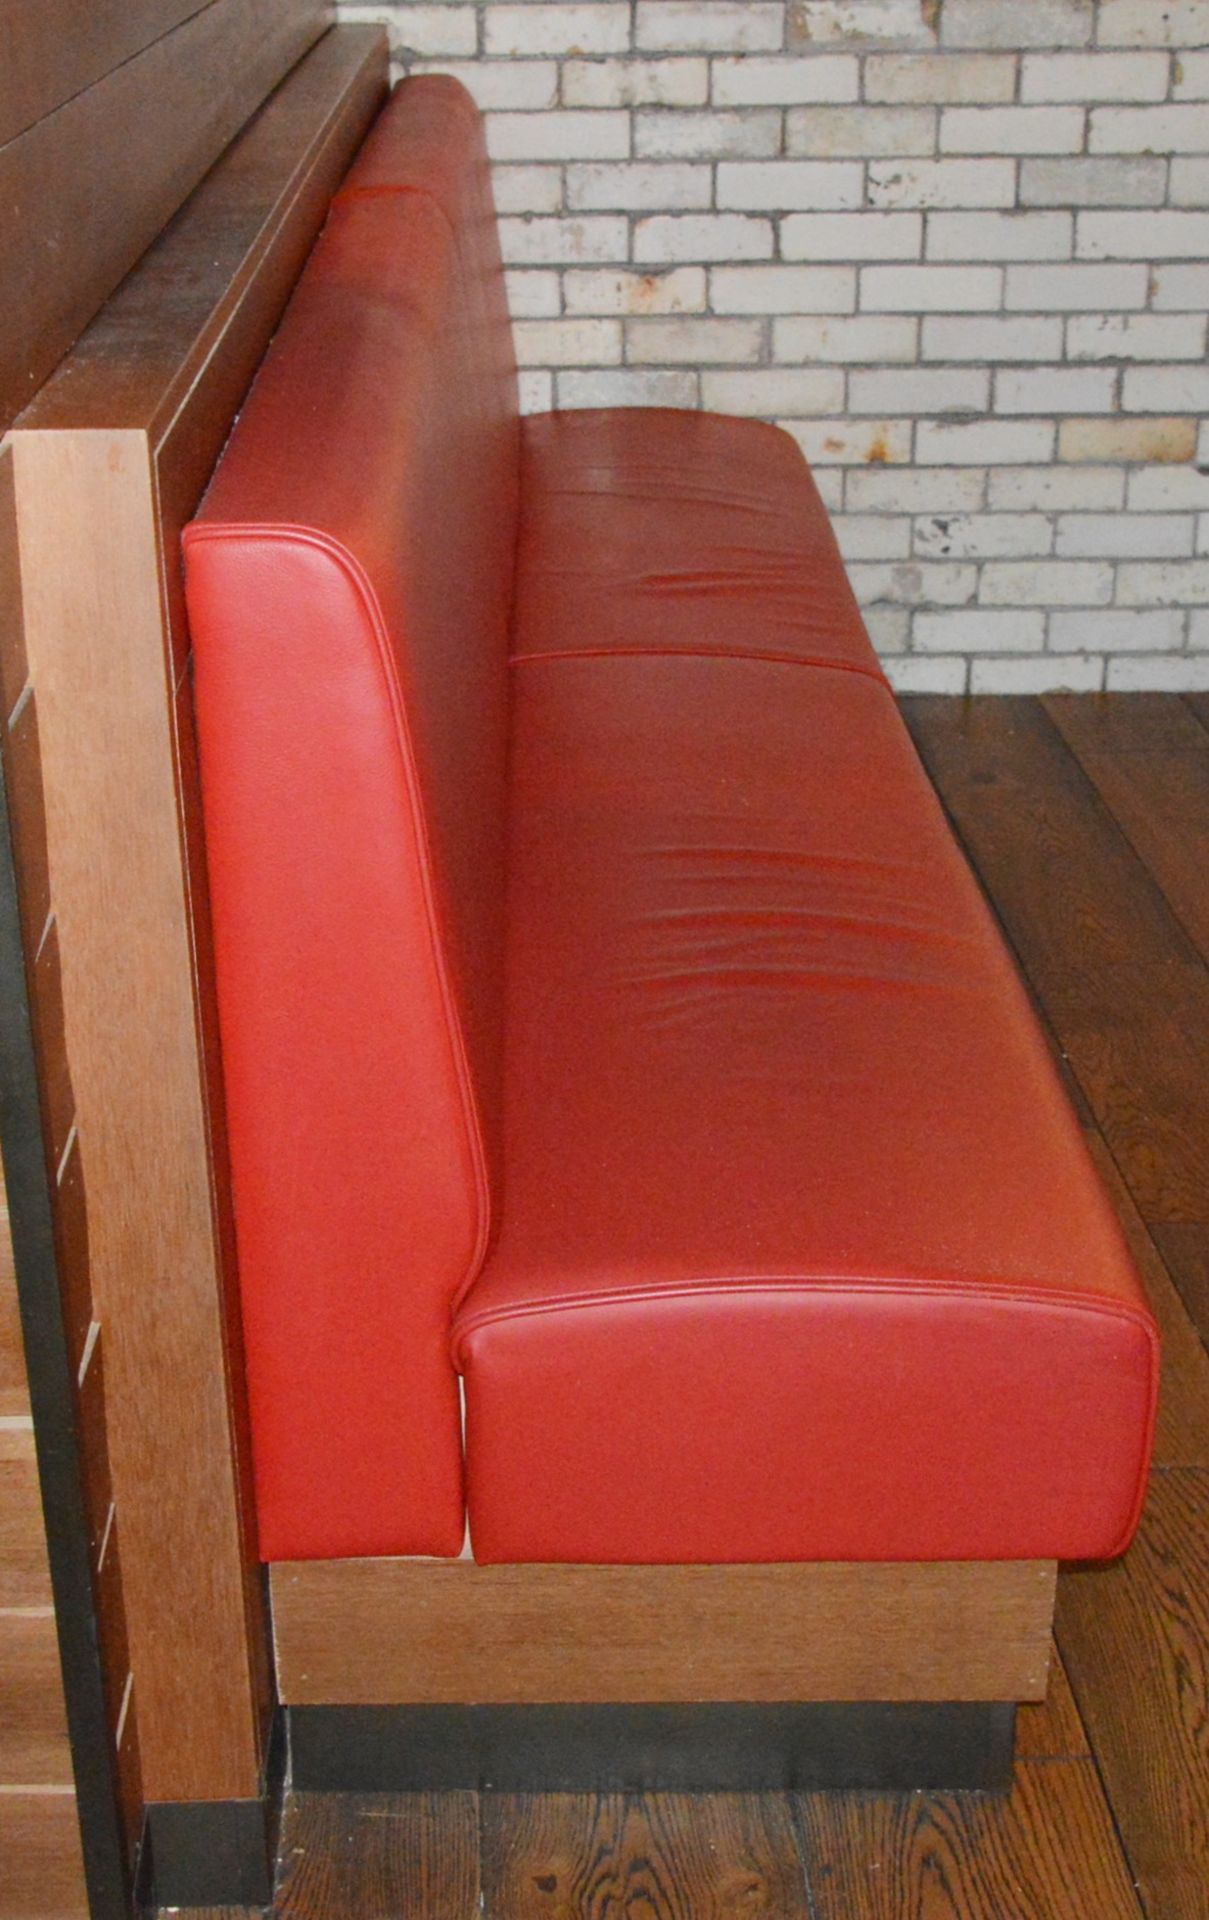 1 x High Back Seating Bench Upholstered in Red Leather With Oak Base and Surround - Image 2 of 5